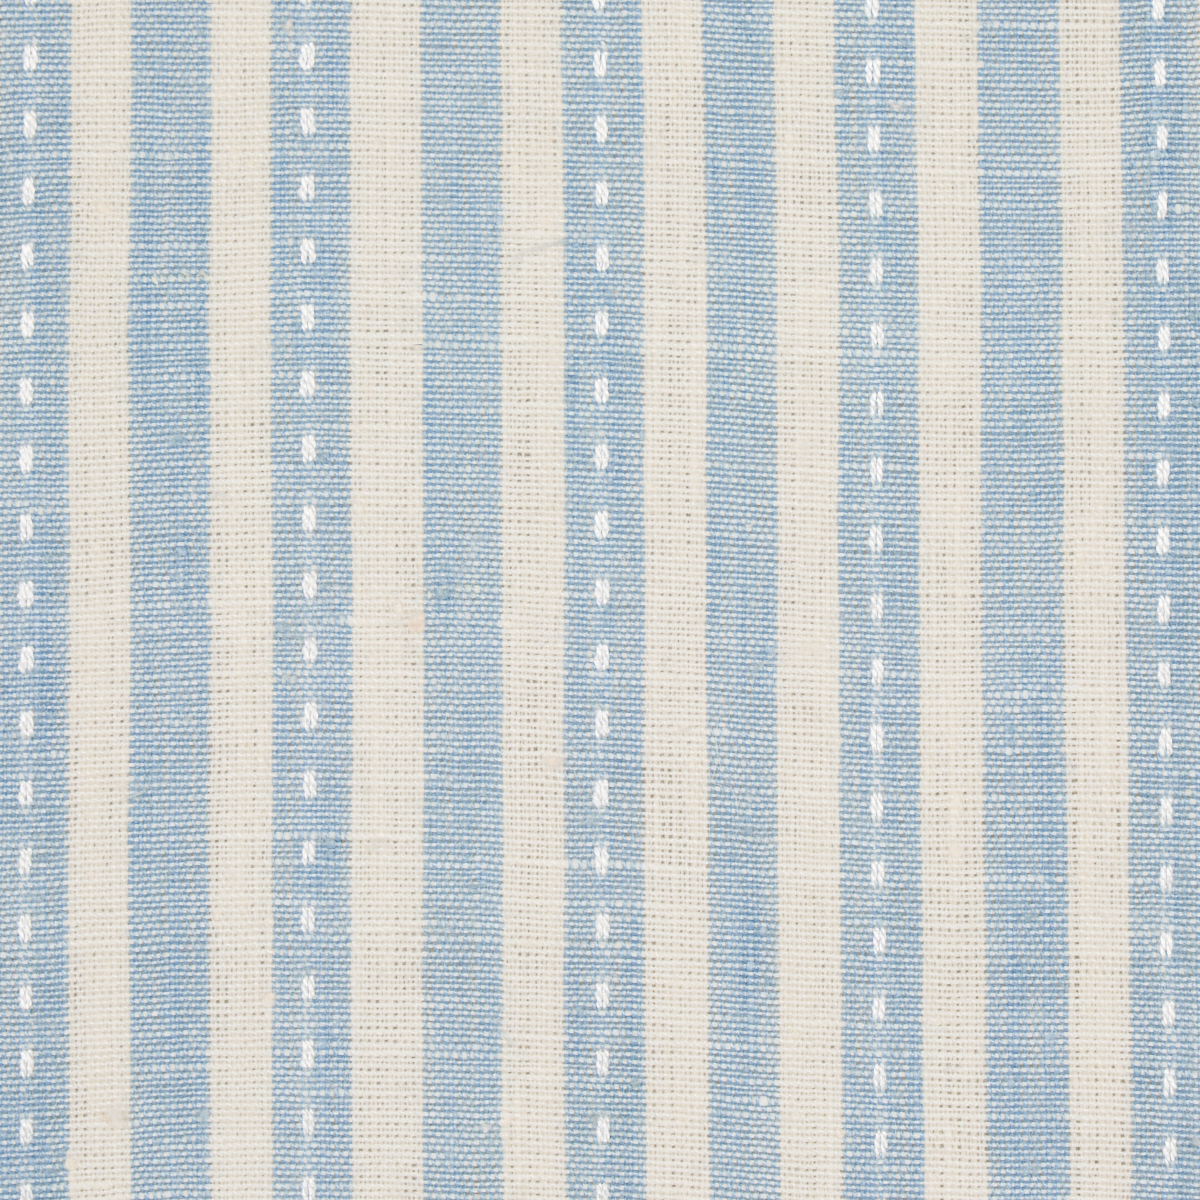 Schumacher Mathis Ticking Stripe in Sky - Paper-Backed Fabric